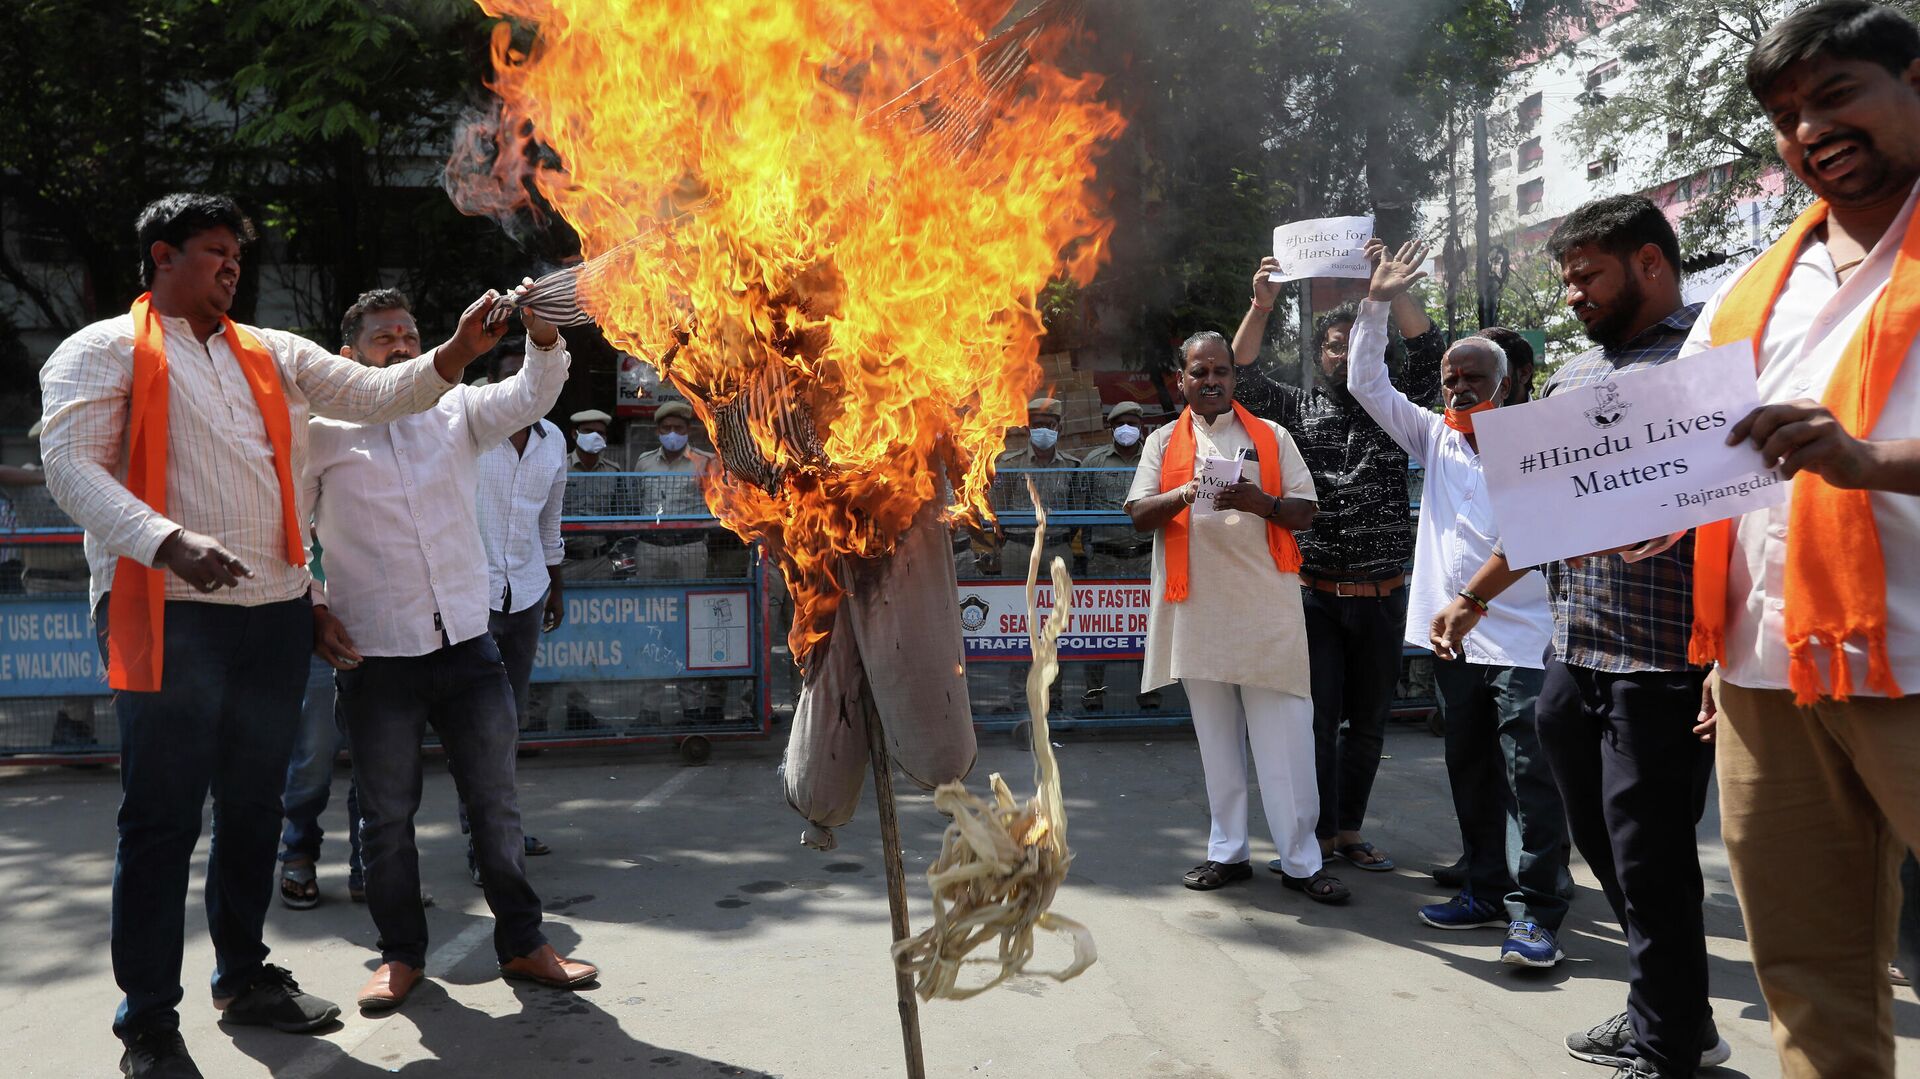 Activists of India's right-wing Bajrang Dal protesting against the killing of one of their members in Karnataka state's Shivamogga burn an effigy representing jihadis in Hyderabad, India, Tuesday, Feb. 22, 2022 - Sputnik International, 1920, 22.02.2022